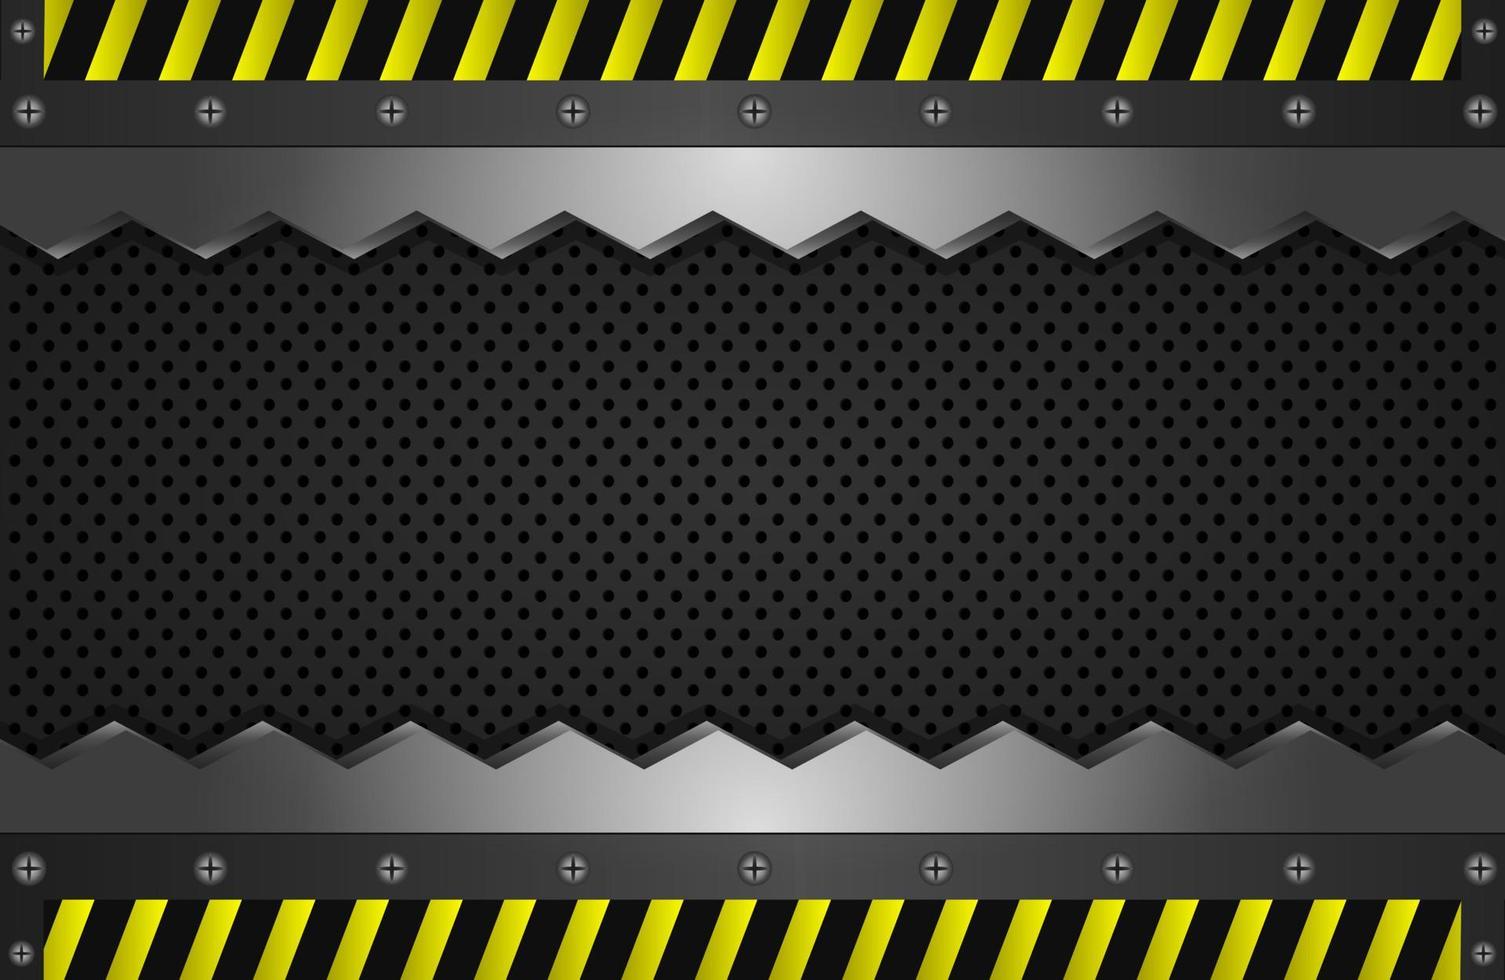 Zigzag metal background template, perforated iron sheet, with yellow line warning sign, vector illustration